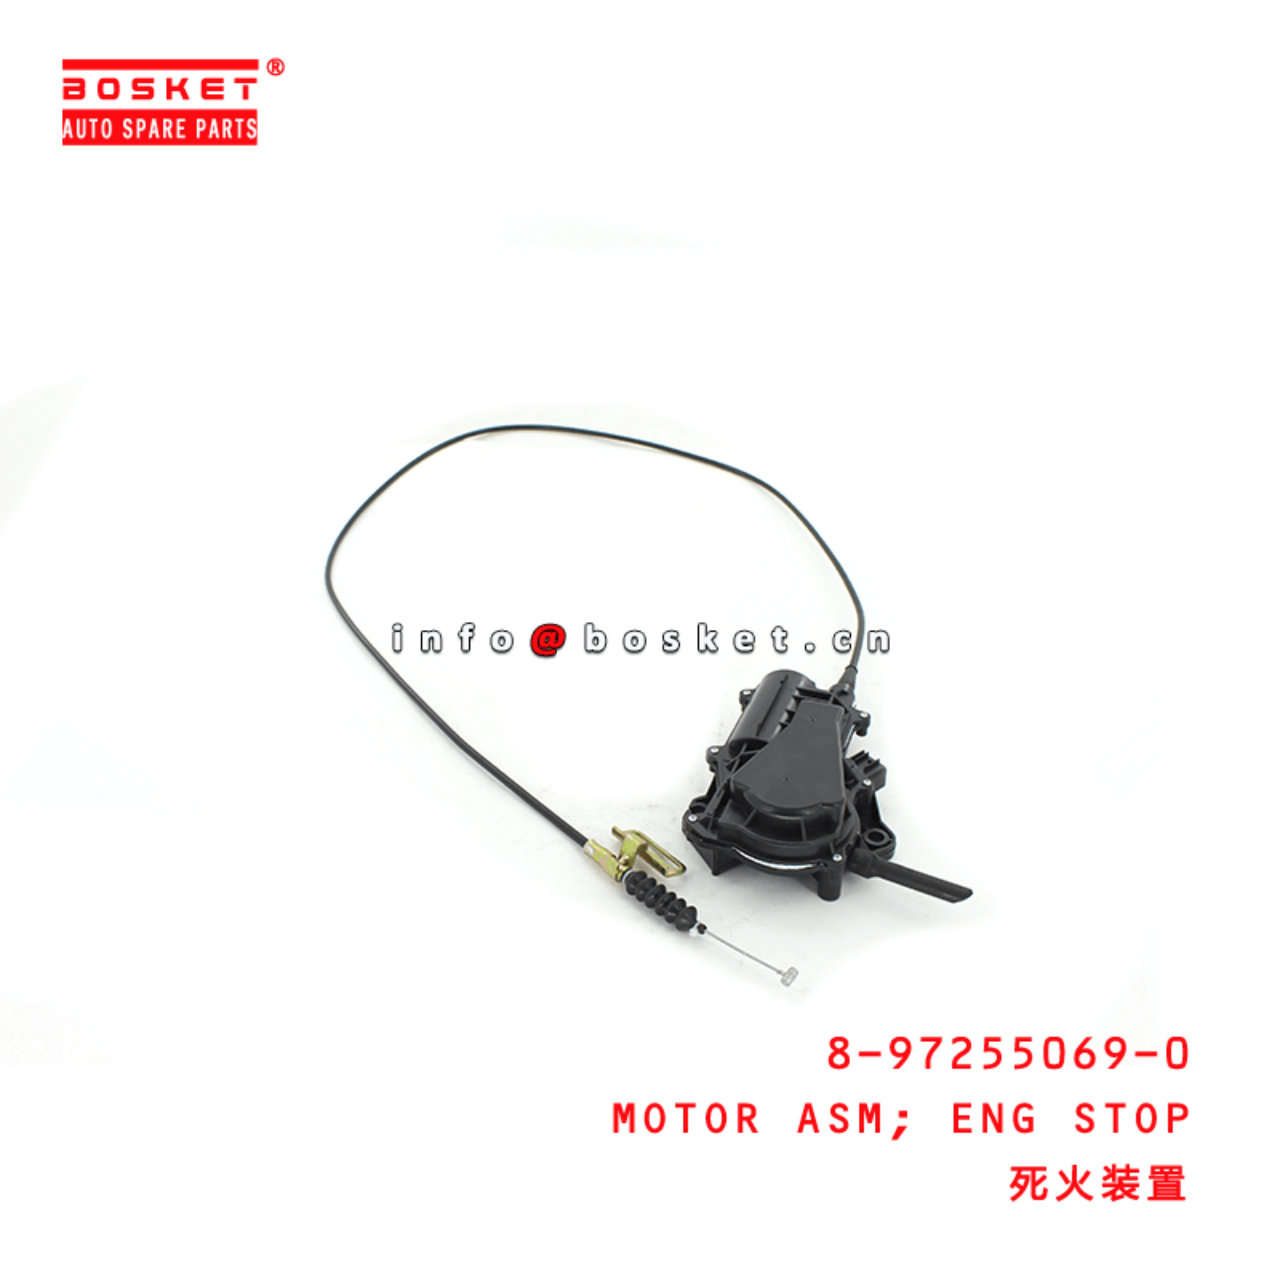 8-97255069-0 Engine Stop Motor Assembly 8972550690 Suitable for 